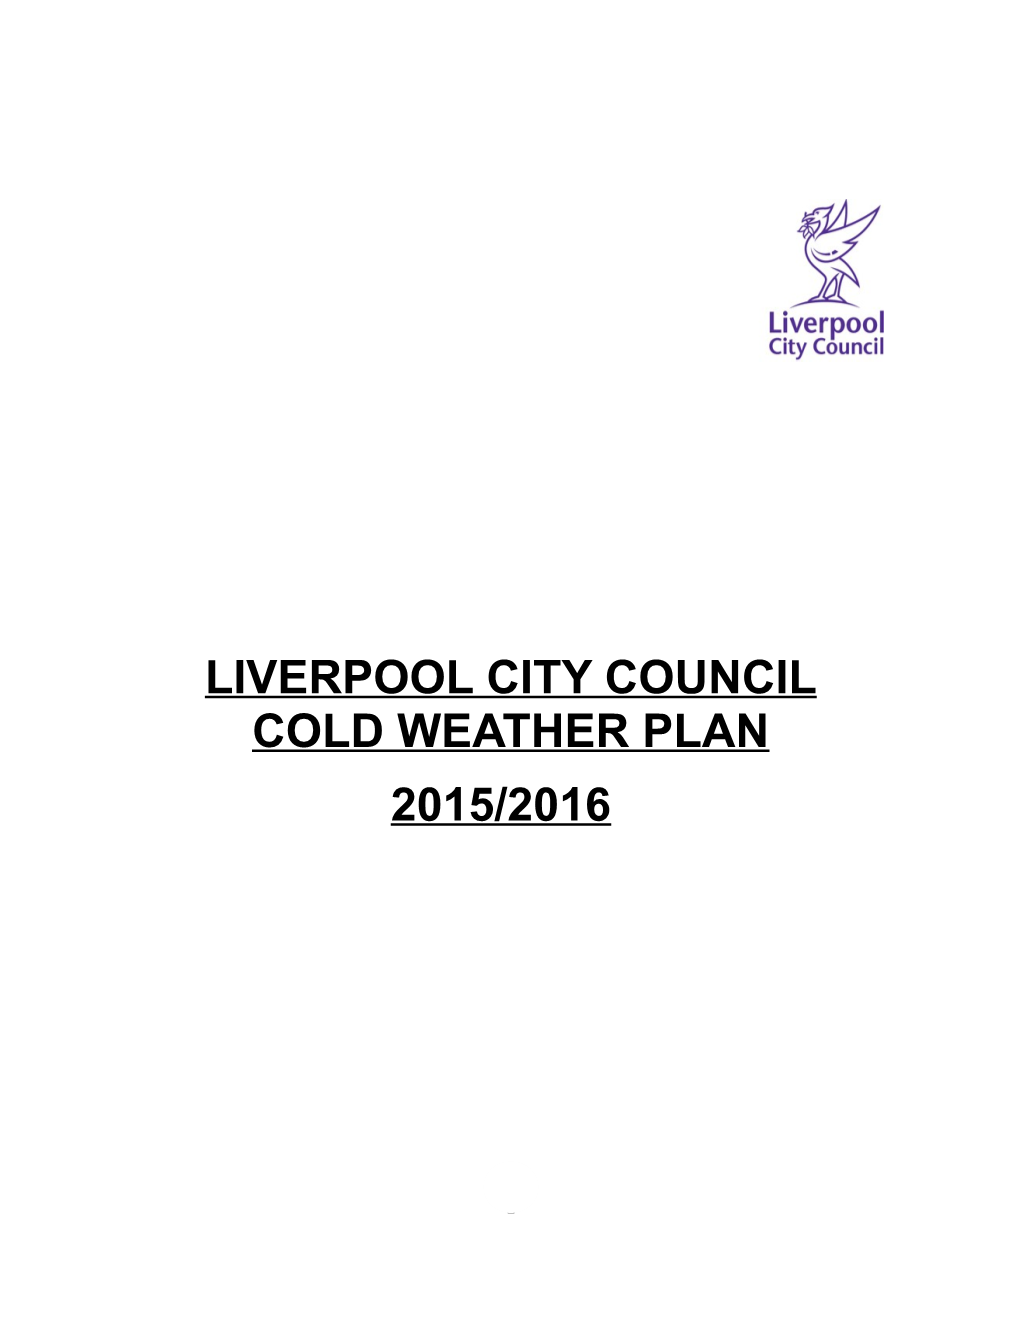 Liverpool City Council Cold Weather Plan